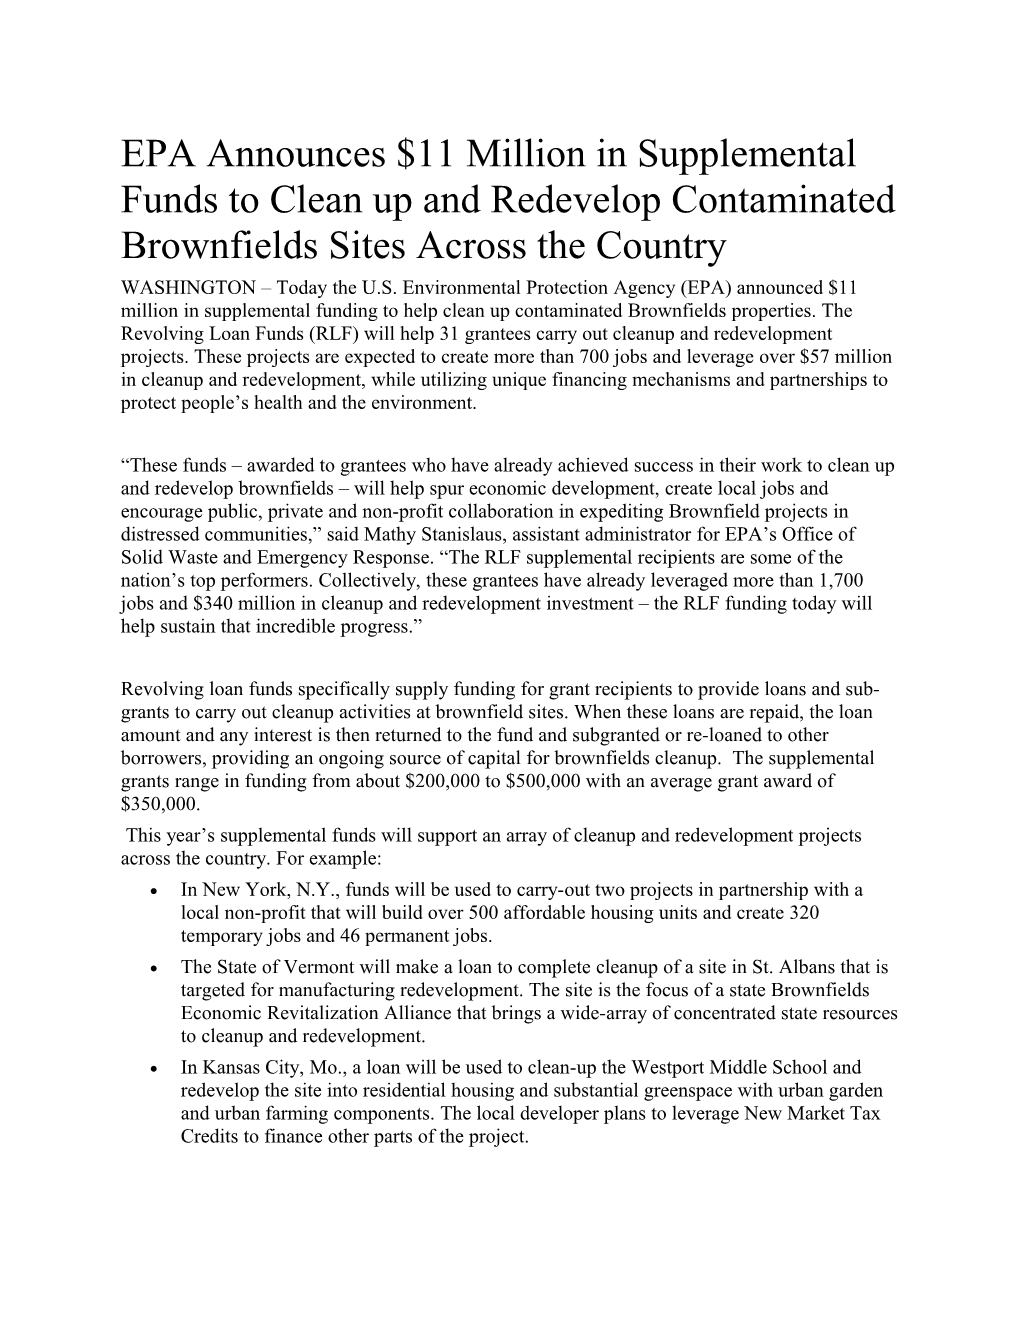 EPA Announces $11 Million in Supplemental Funds to Clean up and Redevelop Contaminated